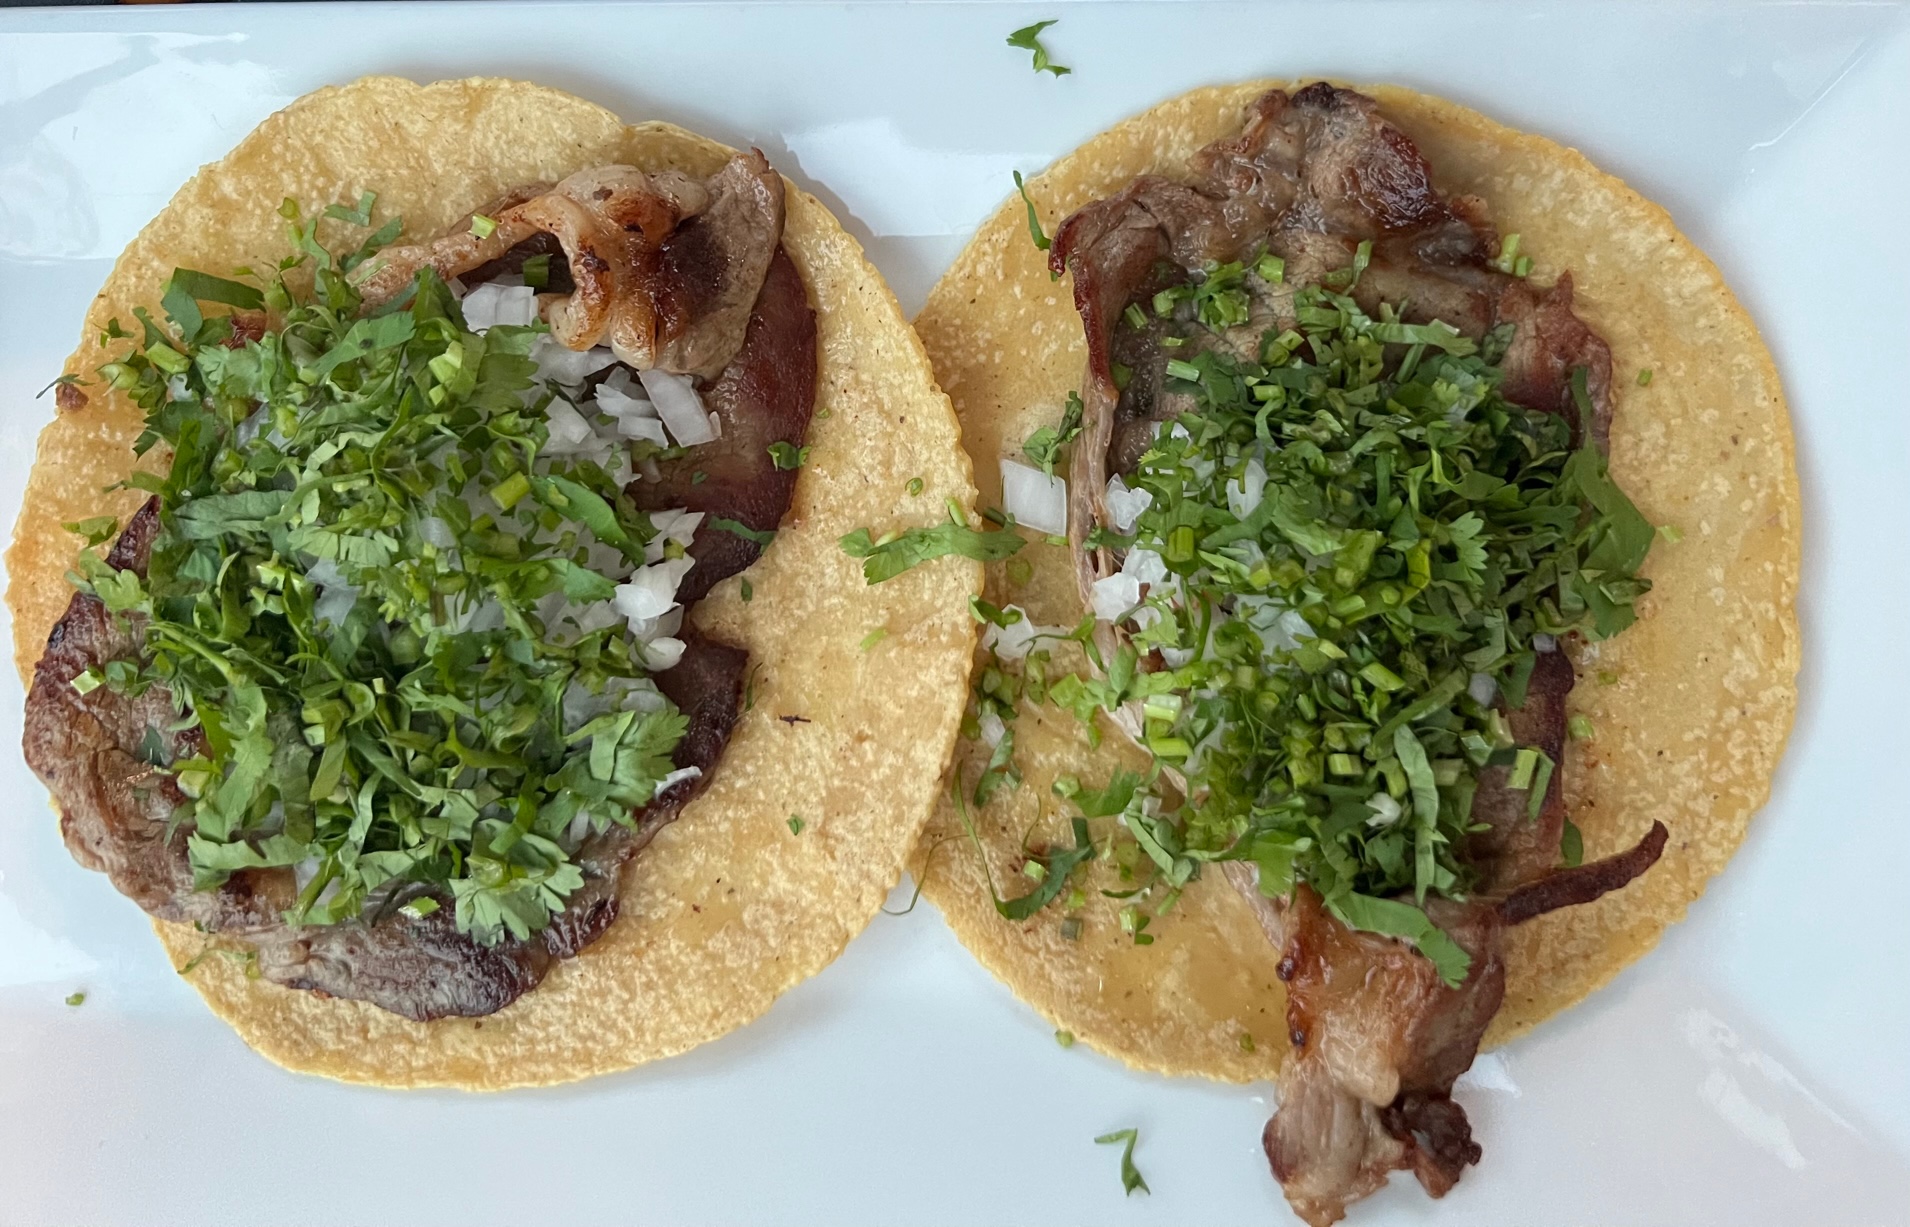 On a white plate, there are two ribeye tacos on corn tortillas. Photo by Alyssa Buckley.